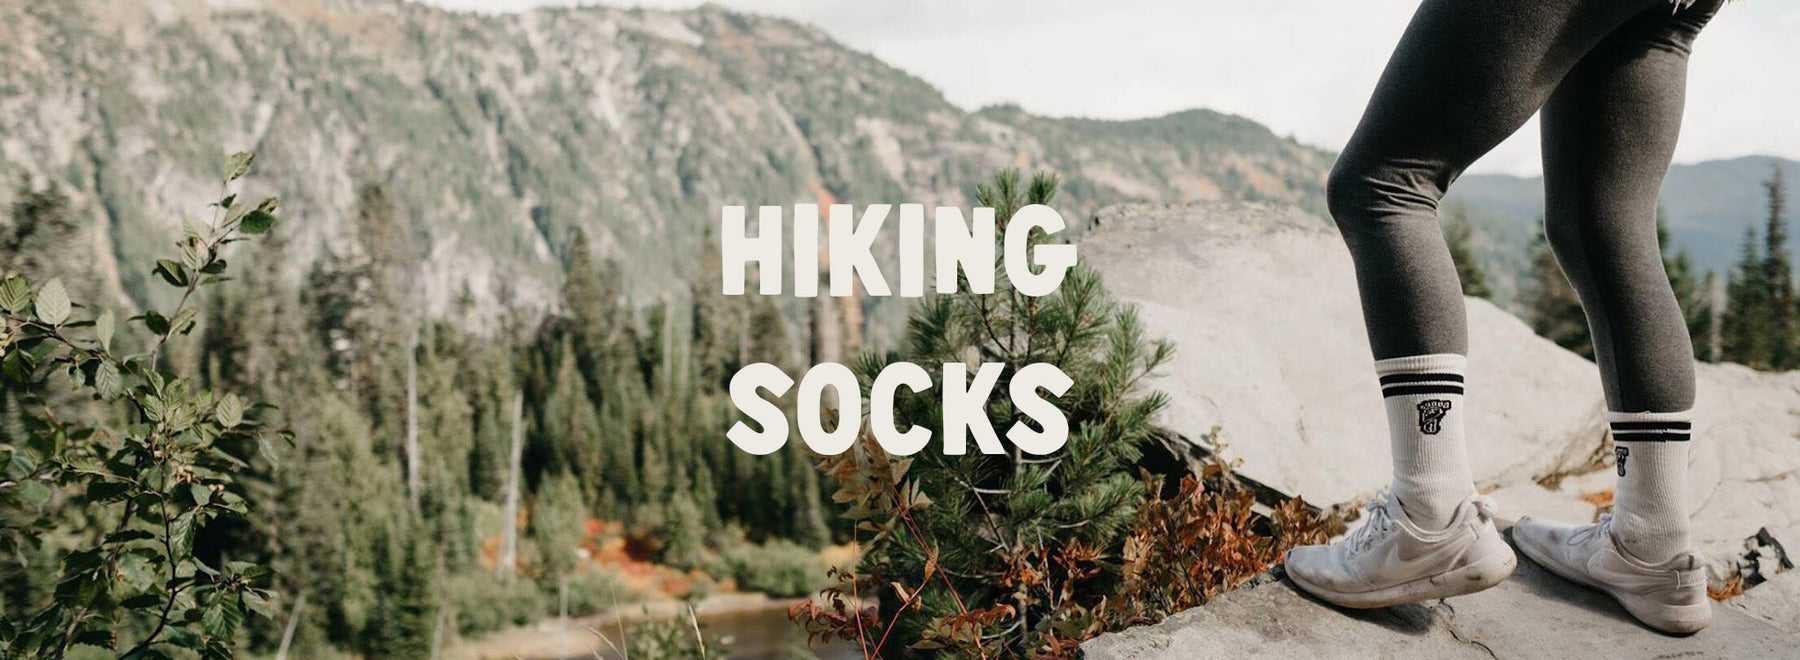 What socks are best for hiking?